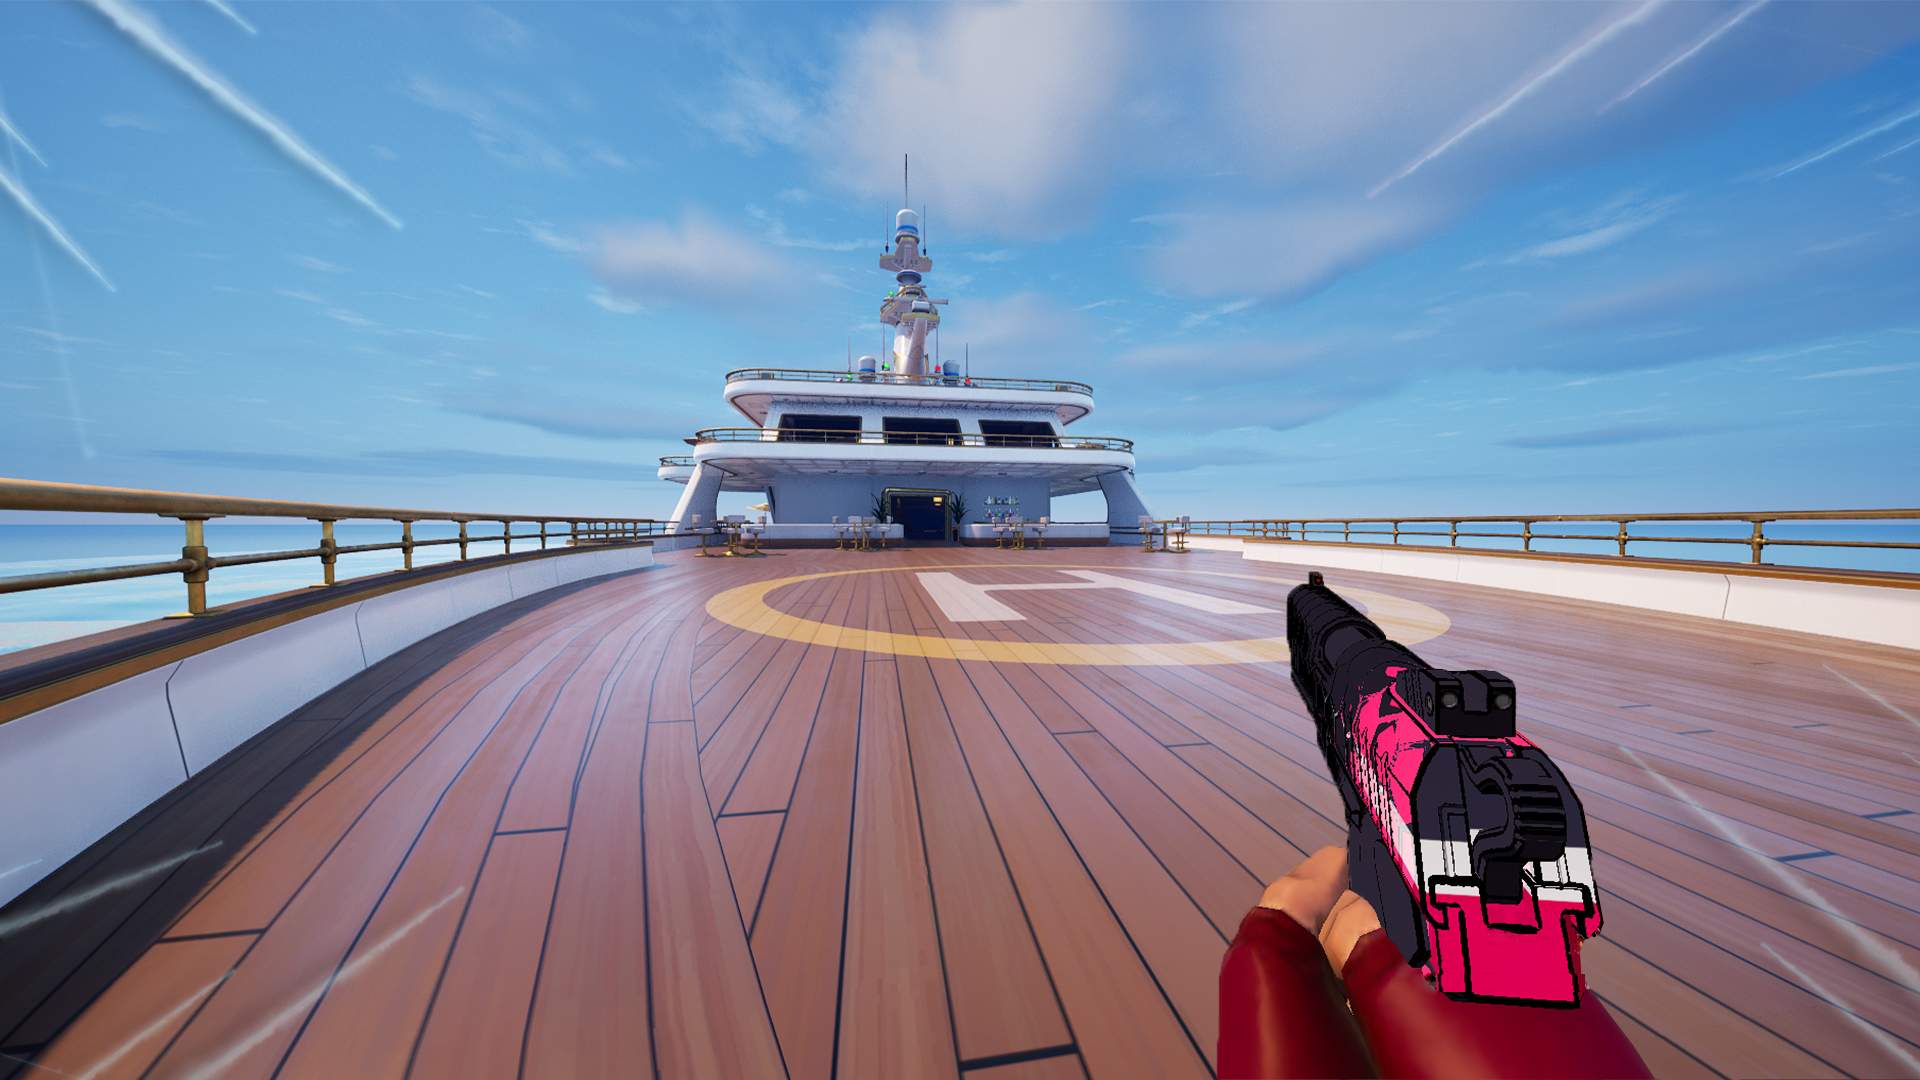 FIRST PERSON GUN GAME - THE YACHT